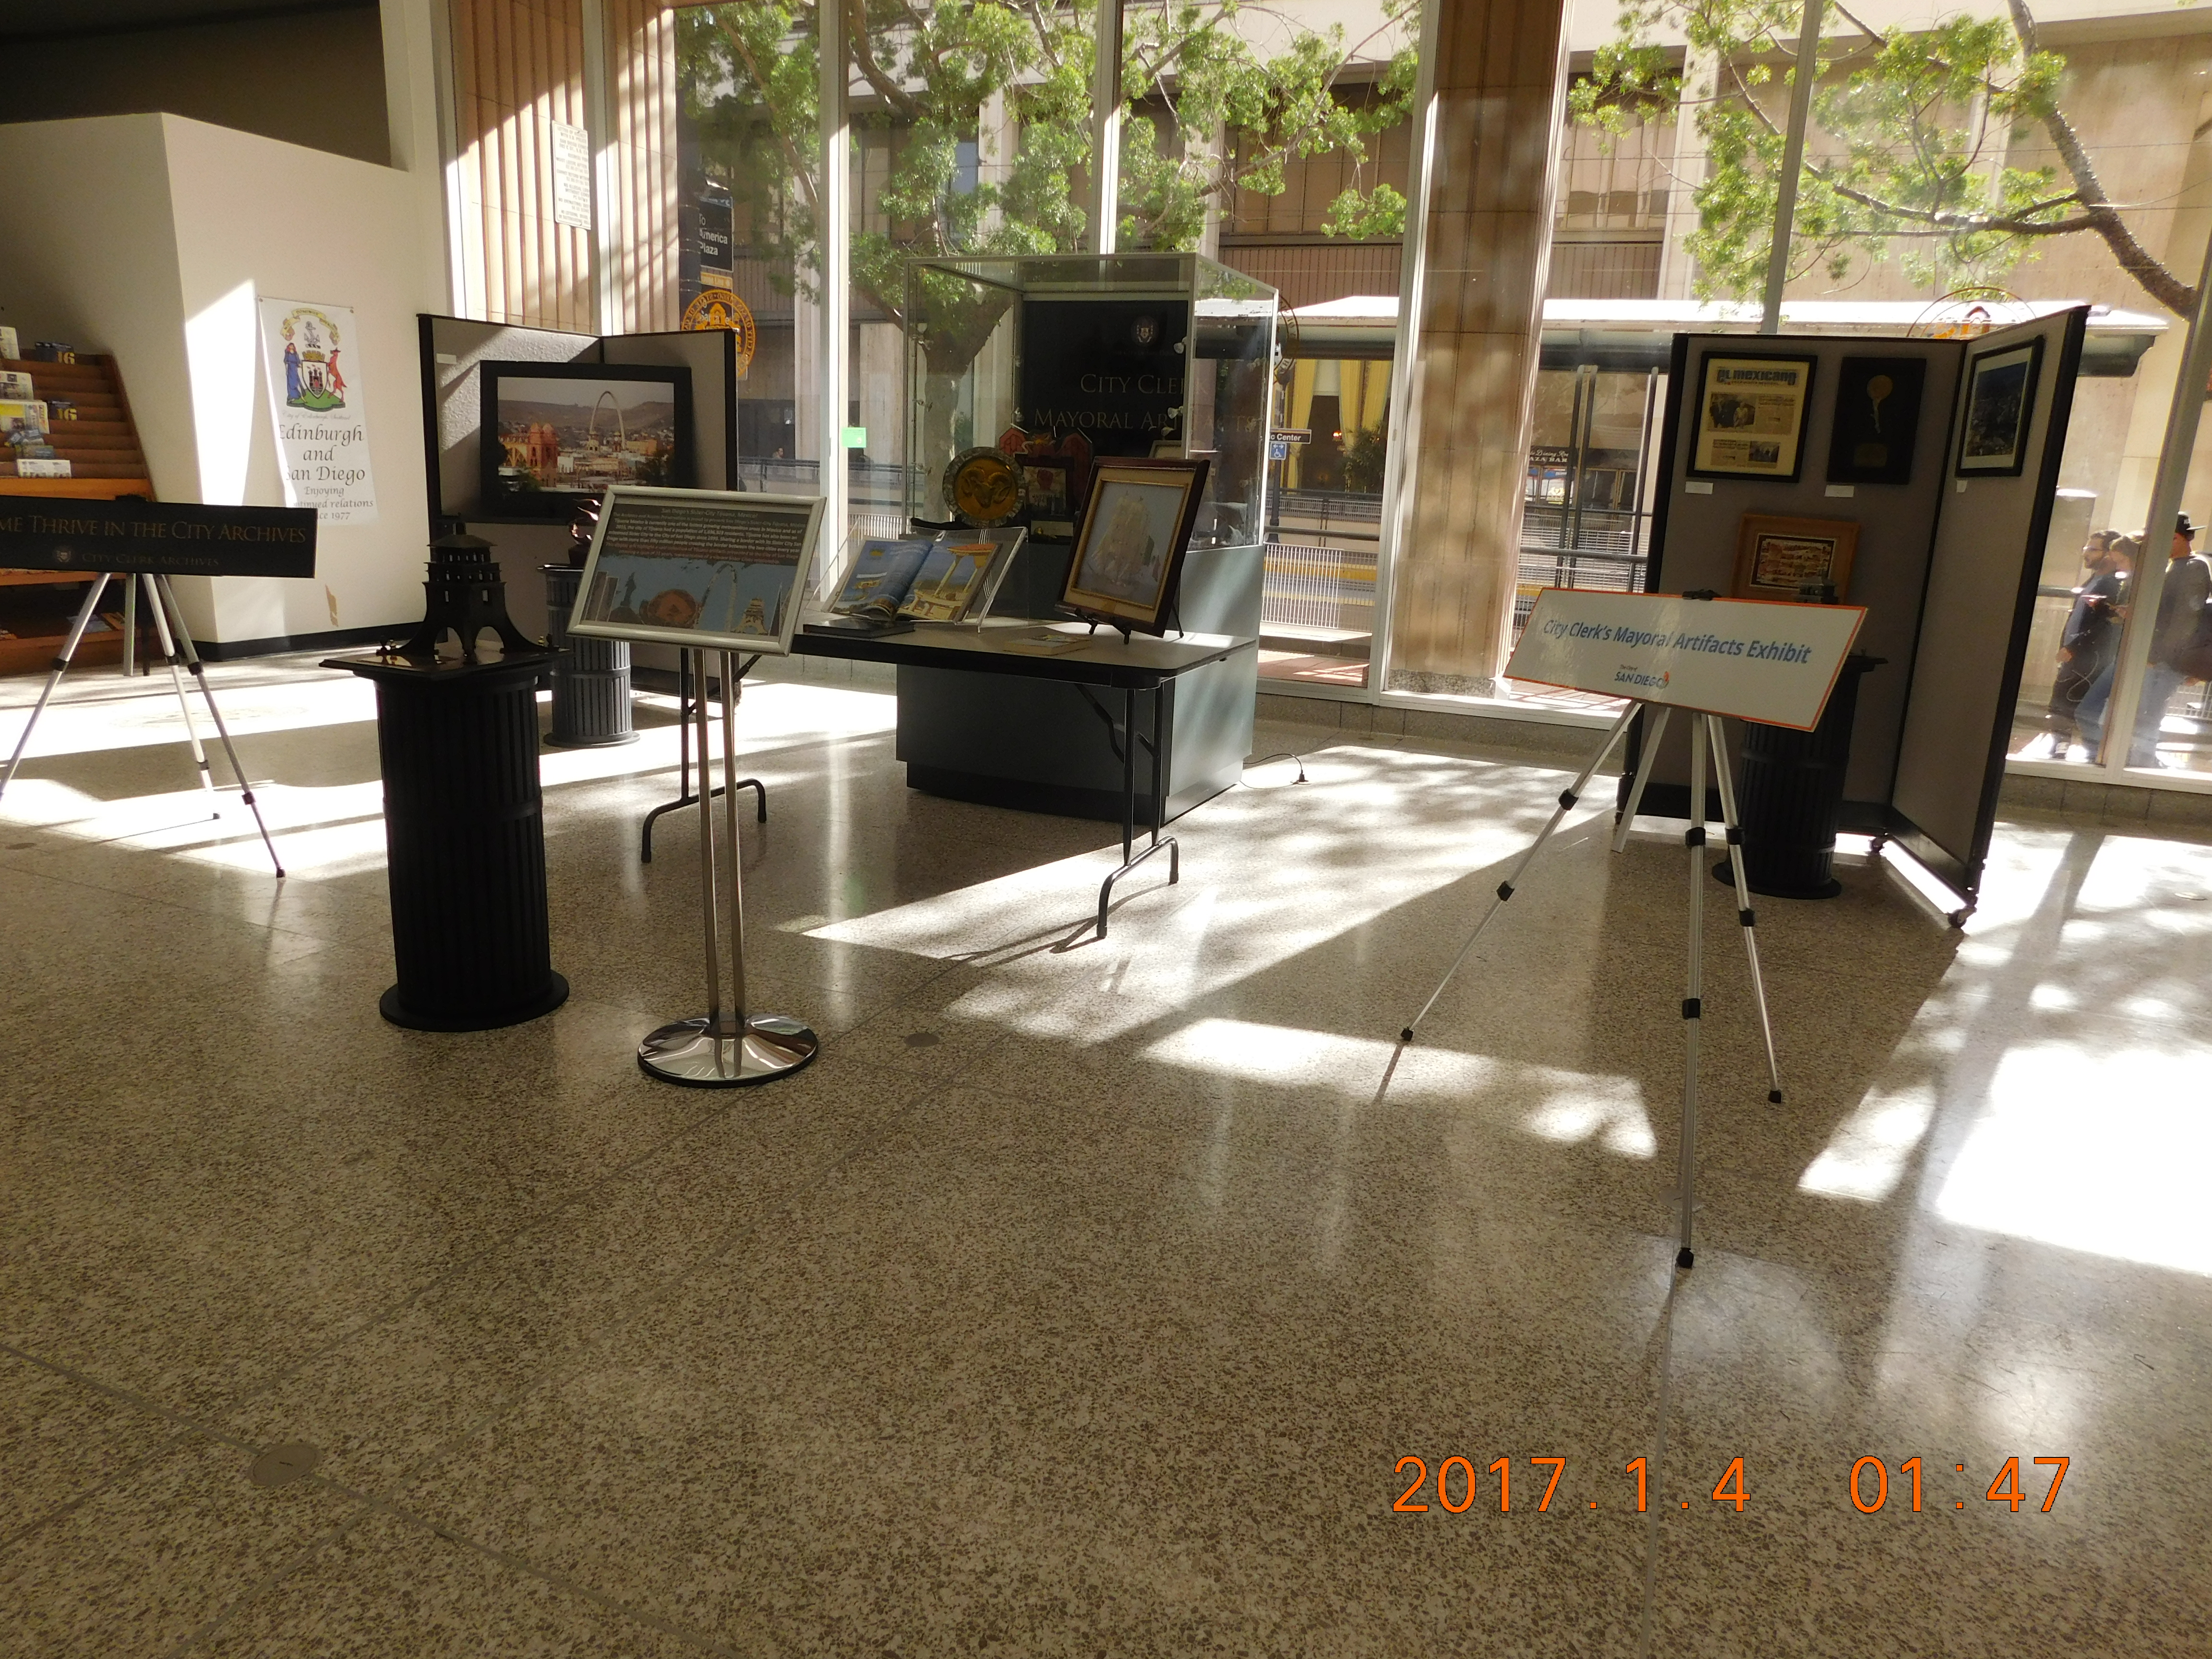 City Administration Building highlights the completed display of our Sister-City Tijuana in natual lighting